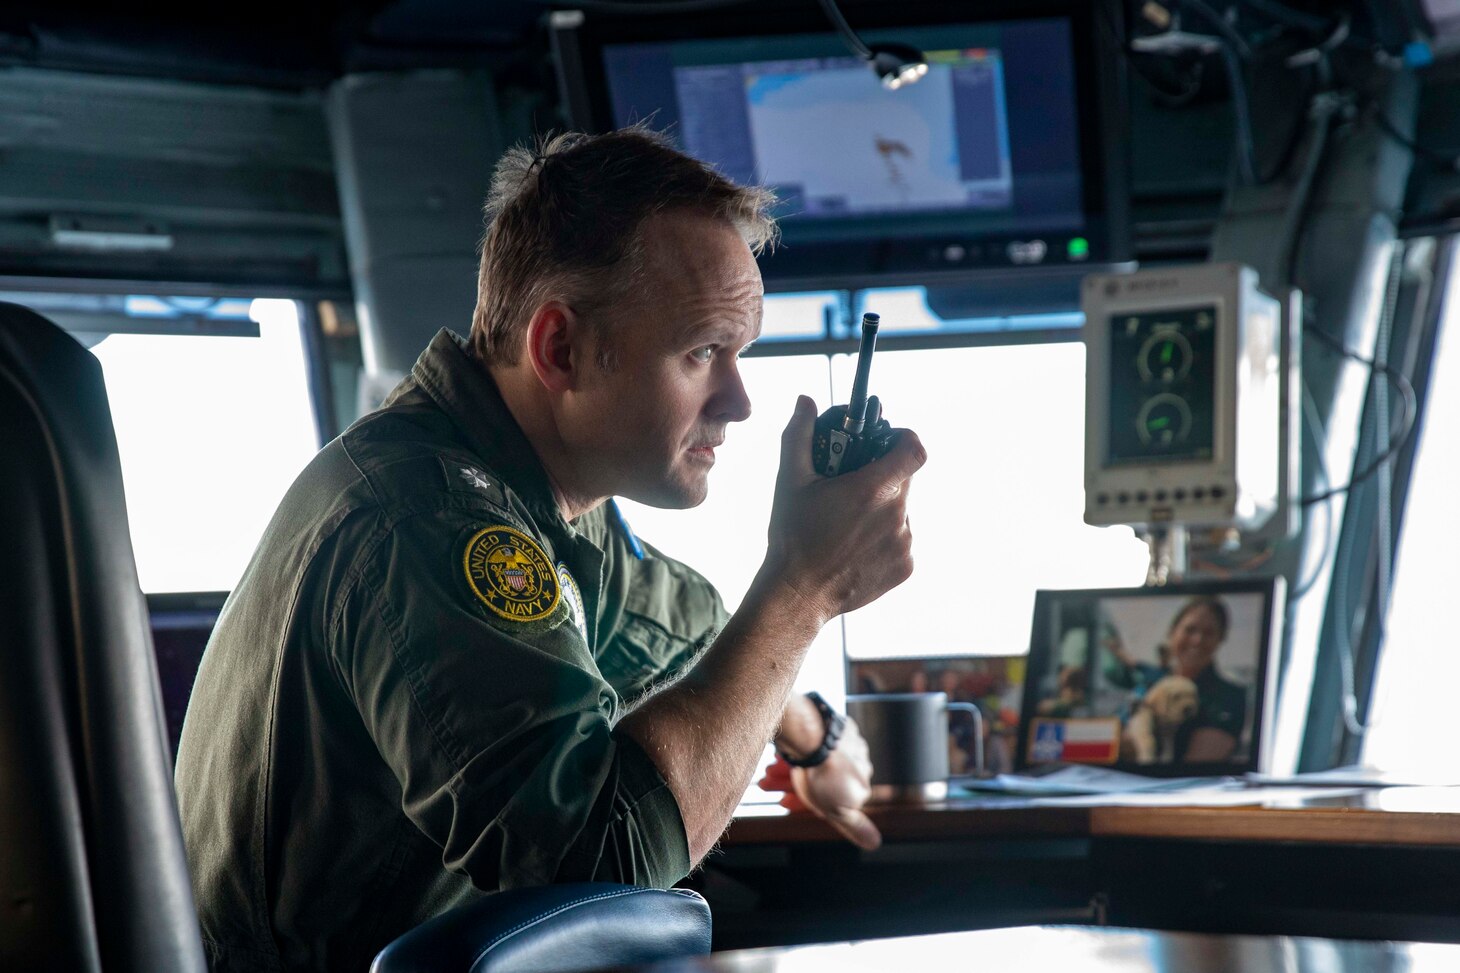 Cmdr. Ryan Conlan, navigation officer of the Nimitz-class aircraft carrier USS George H.W. Bush (CVN 77), relays navigation information into a radio while the ship, along with the embarked staff of Carrier Strike Group (CSG) 10, arrives in Piraeus, Greece, for a scheduled port visit, Feb. 3, 2023.